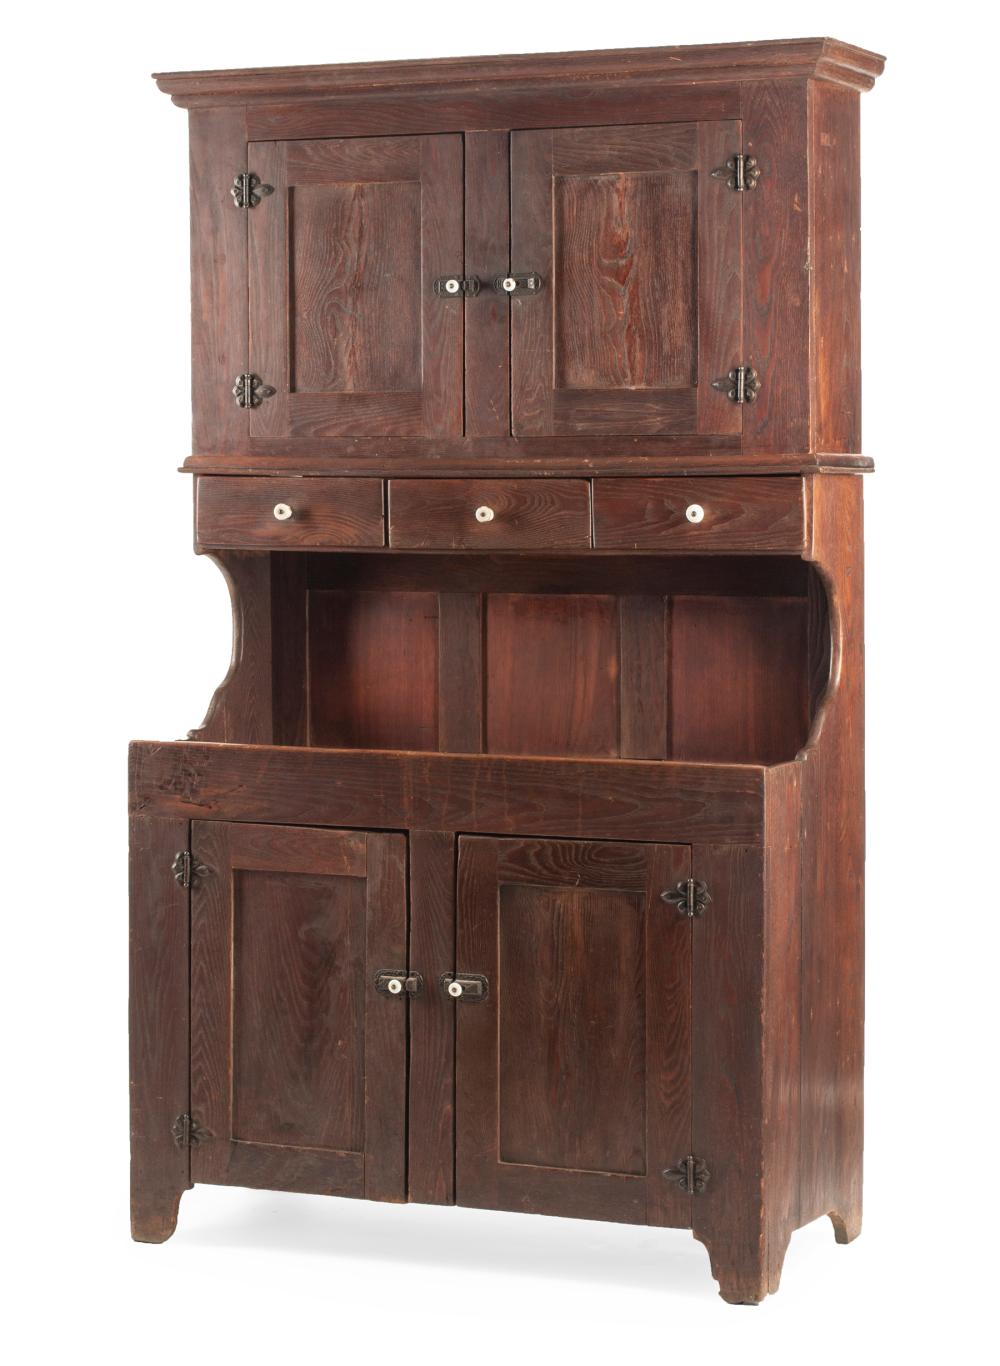 AMERICAN SOUTHERN MIXED WOODS DRY-SINK